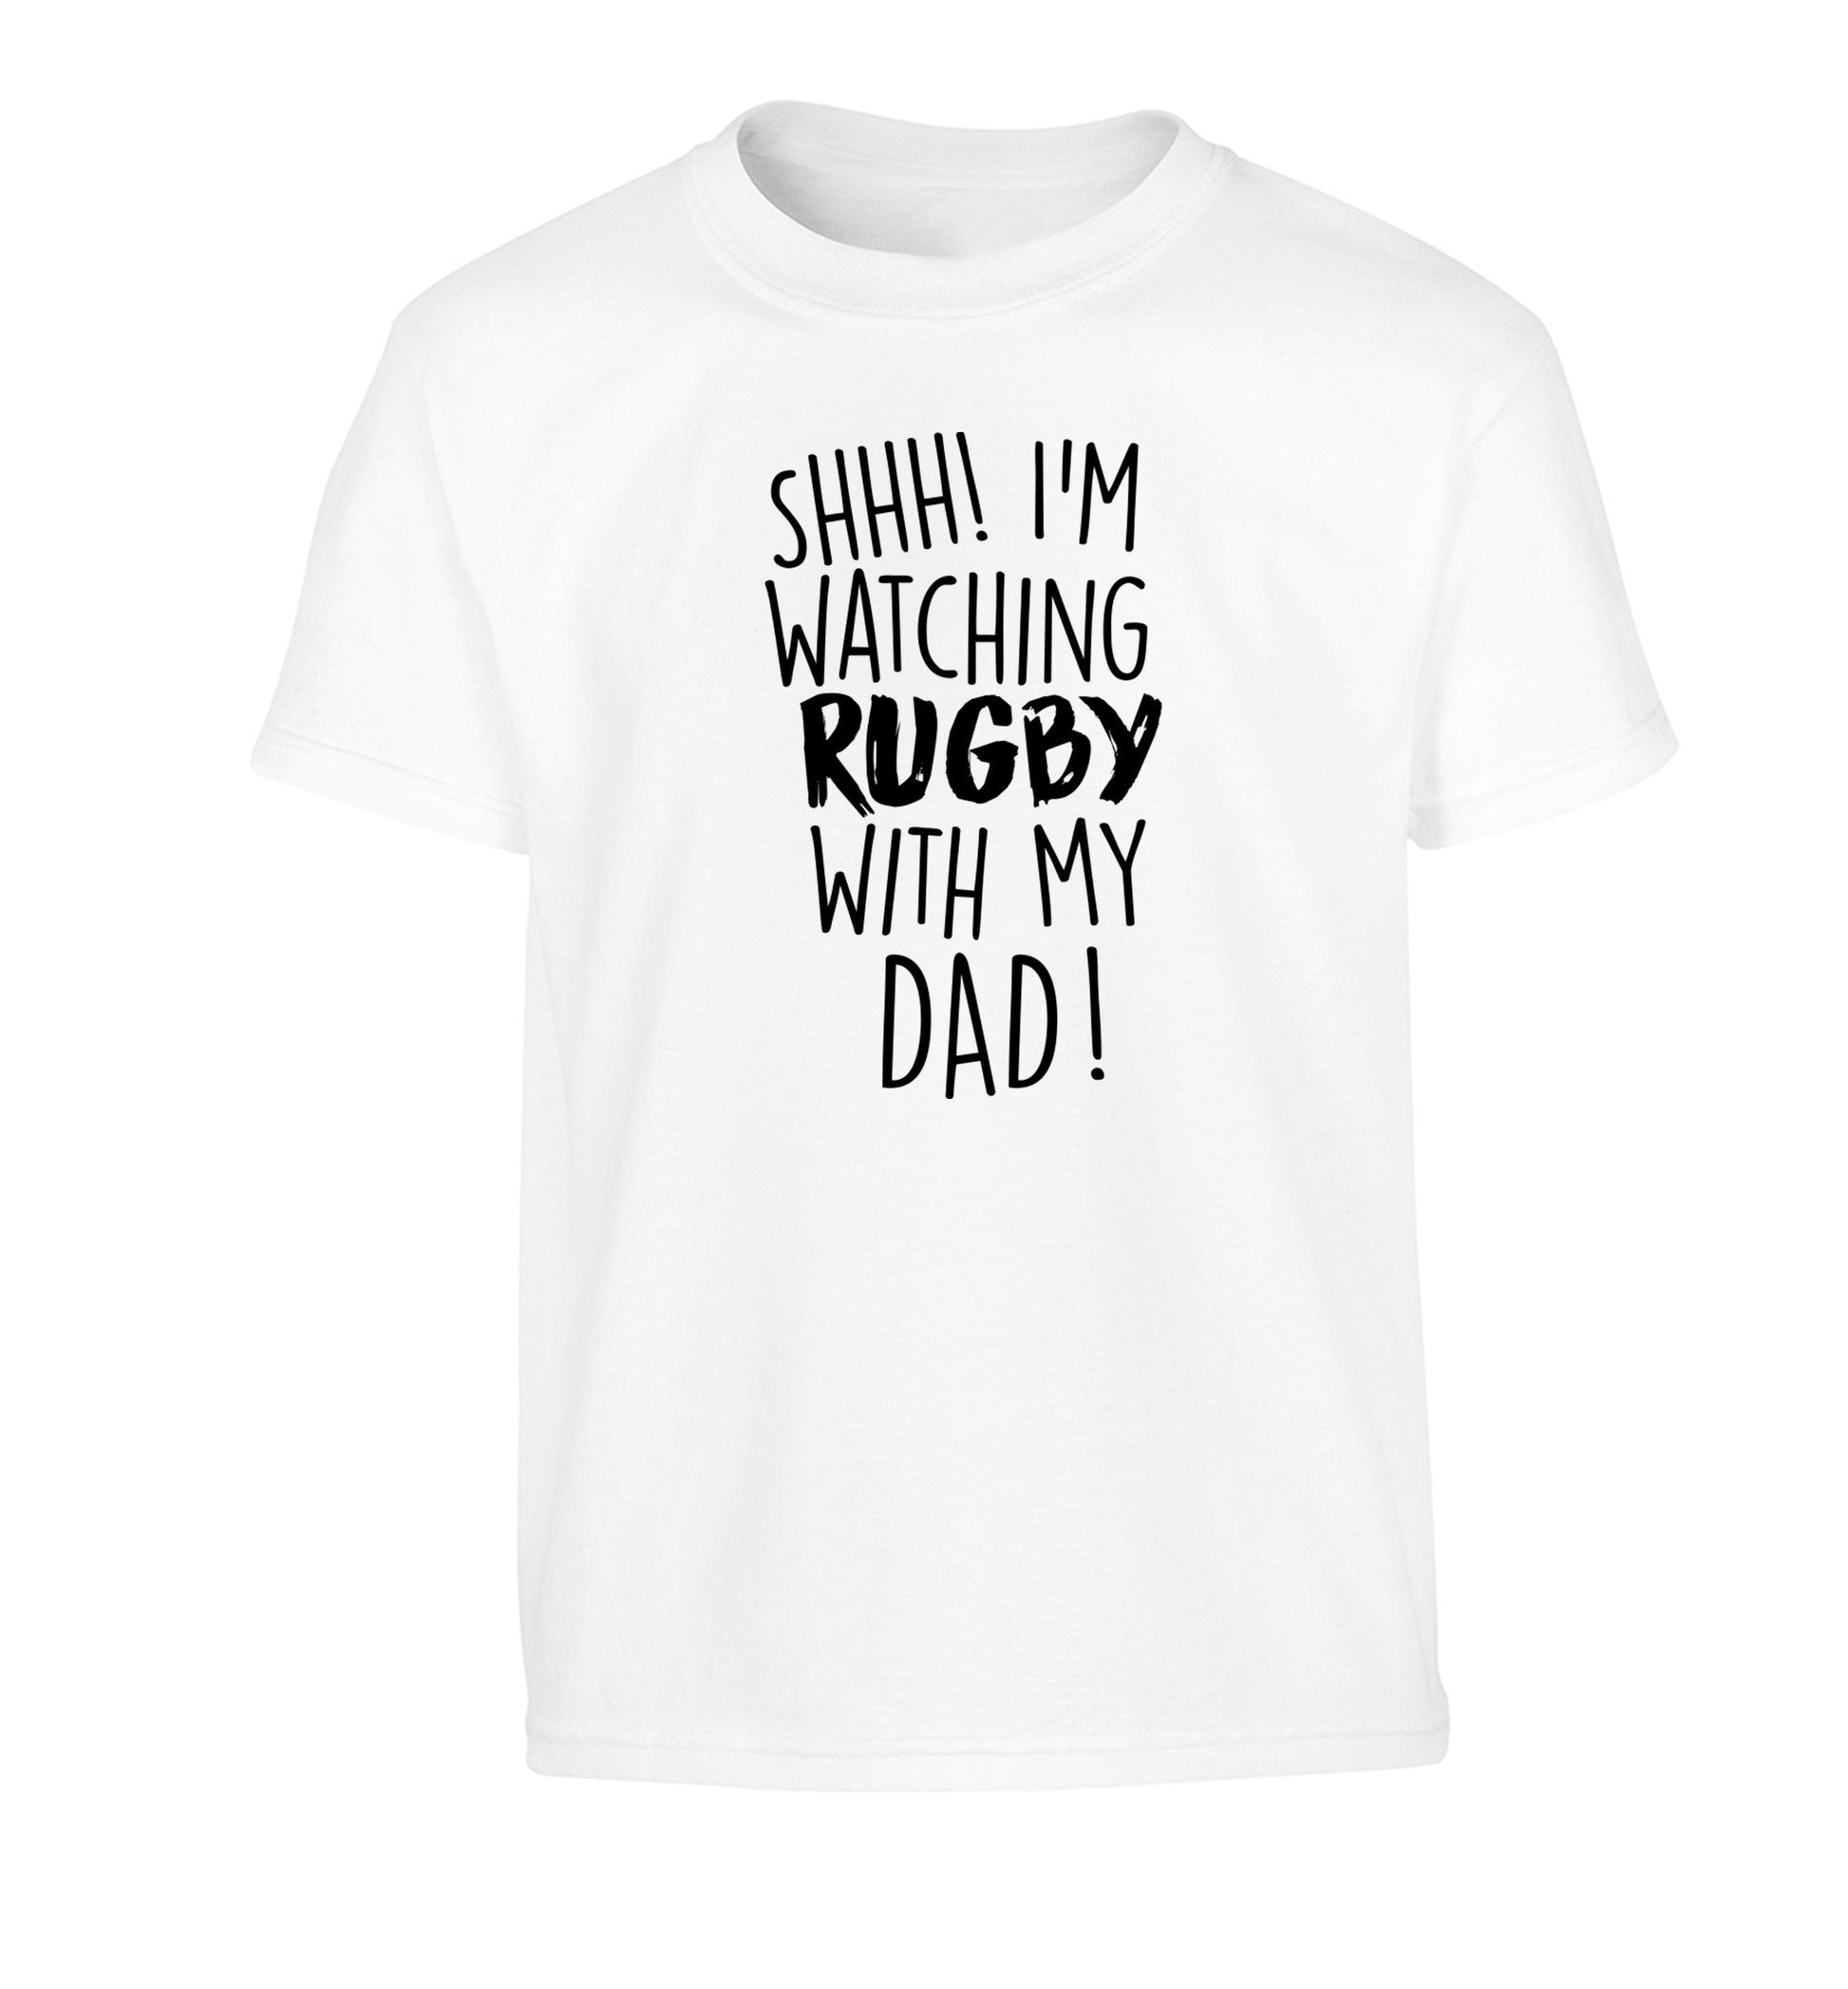 Shh... I'm watching rugby with my dad Children's white Tshirt 12-13 Years